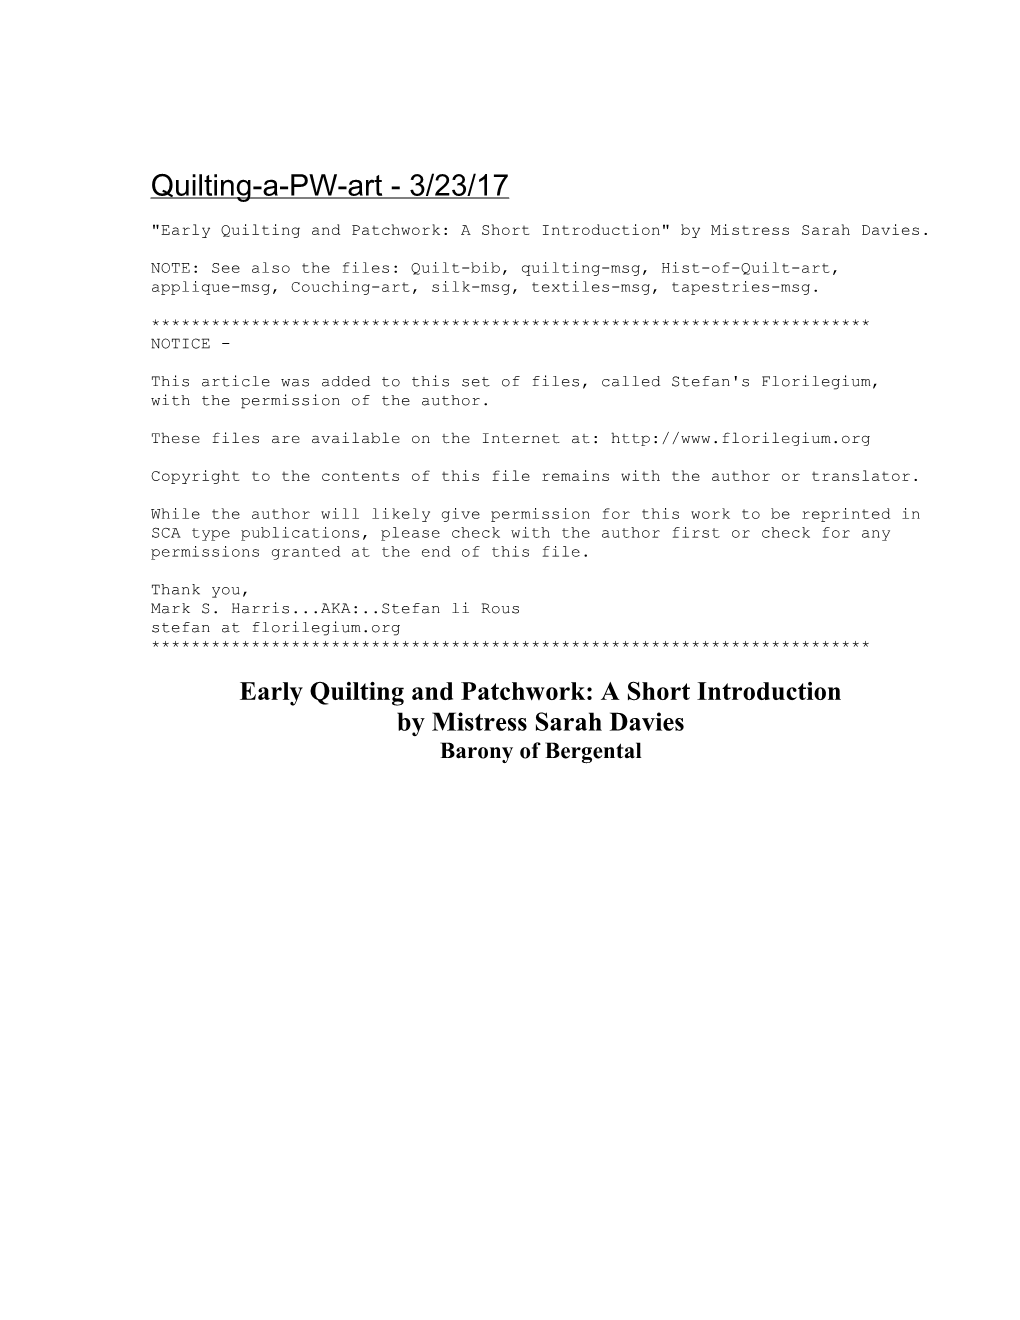 Early Quilting and Patchwork: a Short Introduction by Mistress Sarah Davies